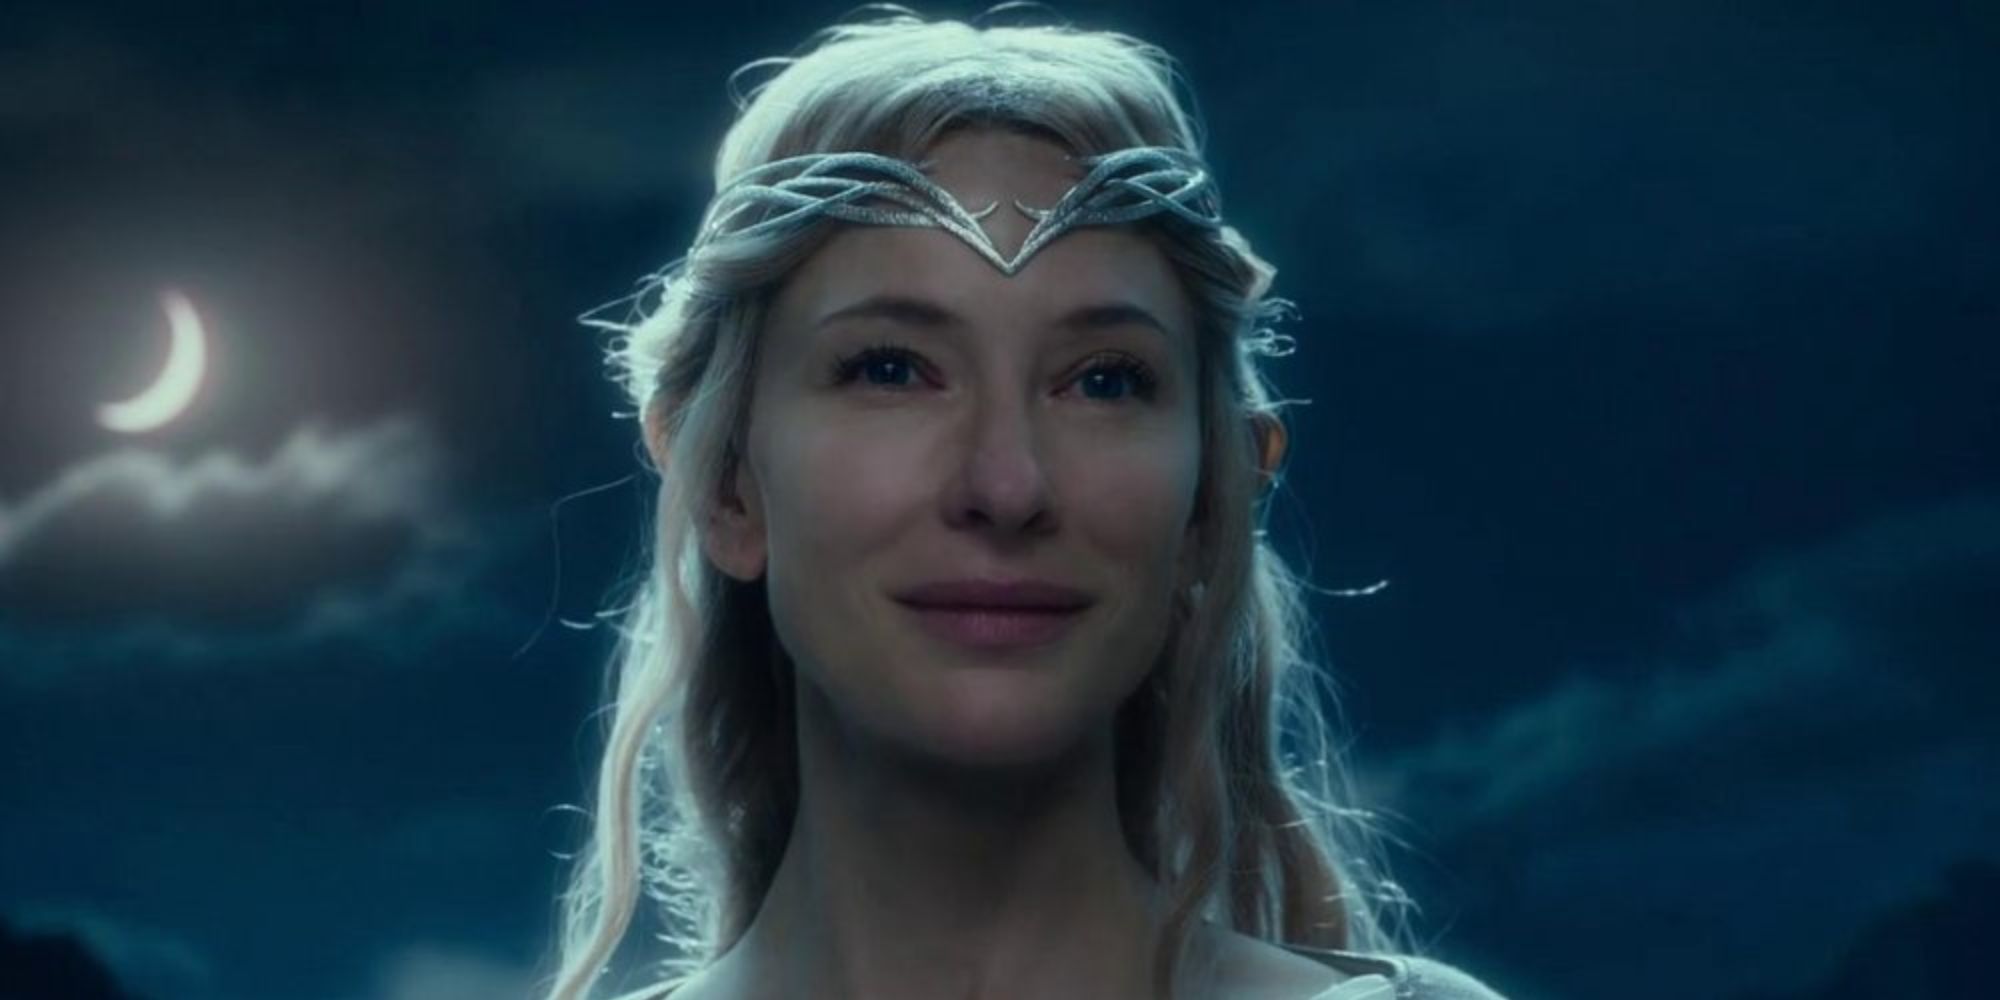 Galadriel smiling softly at night in The Hobbit